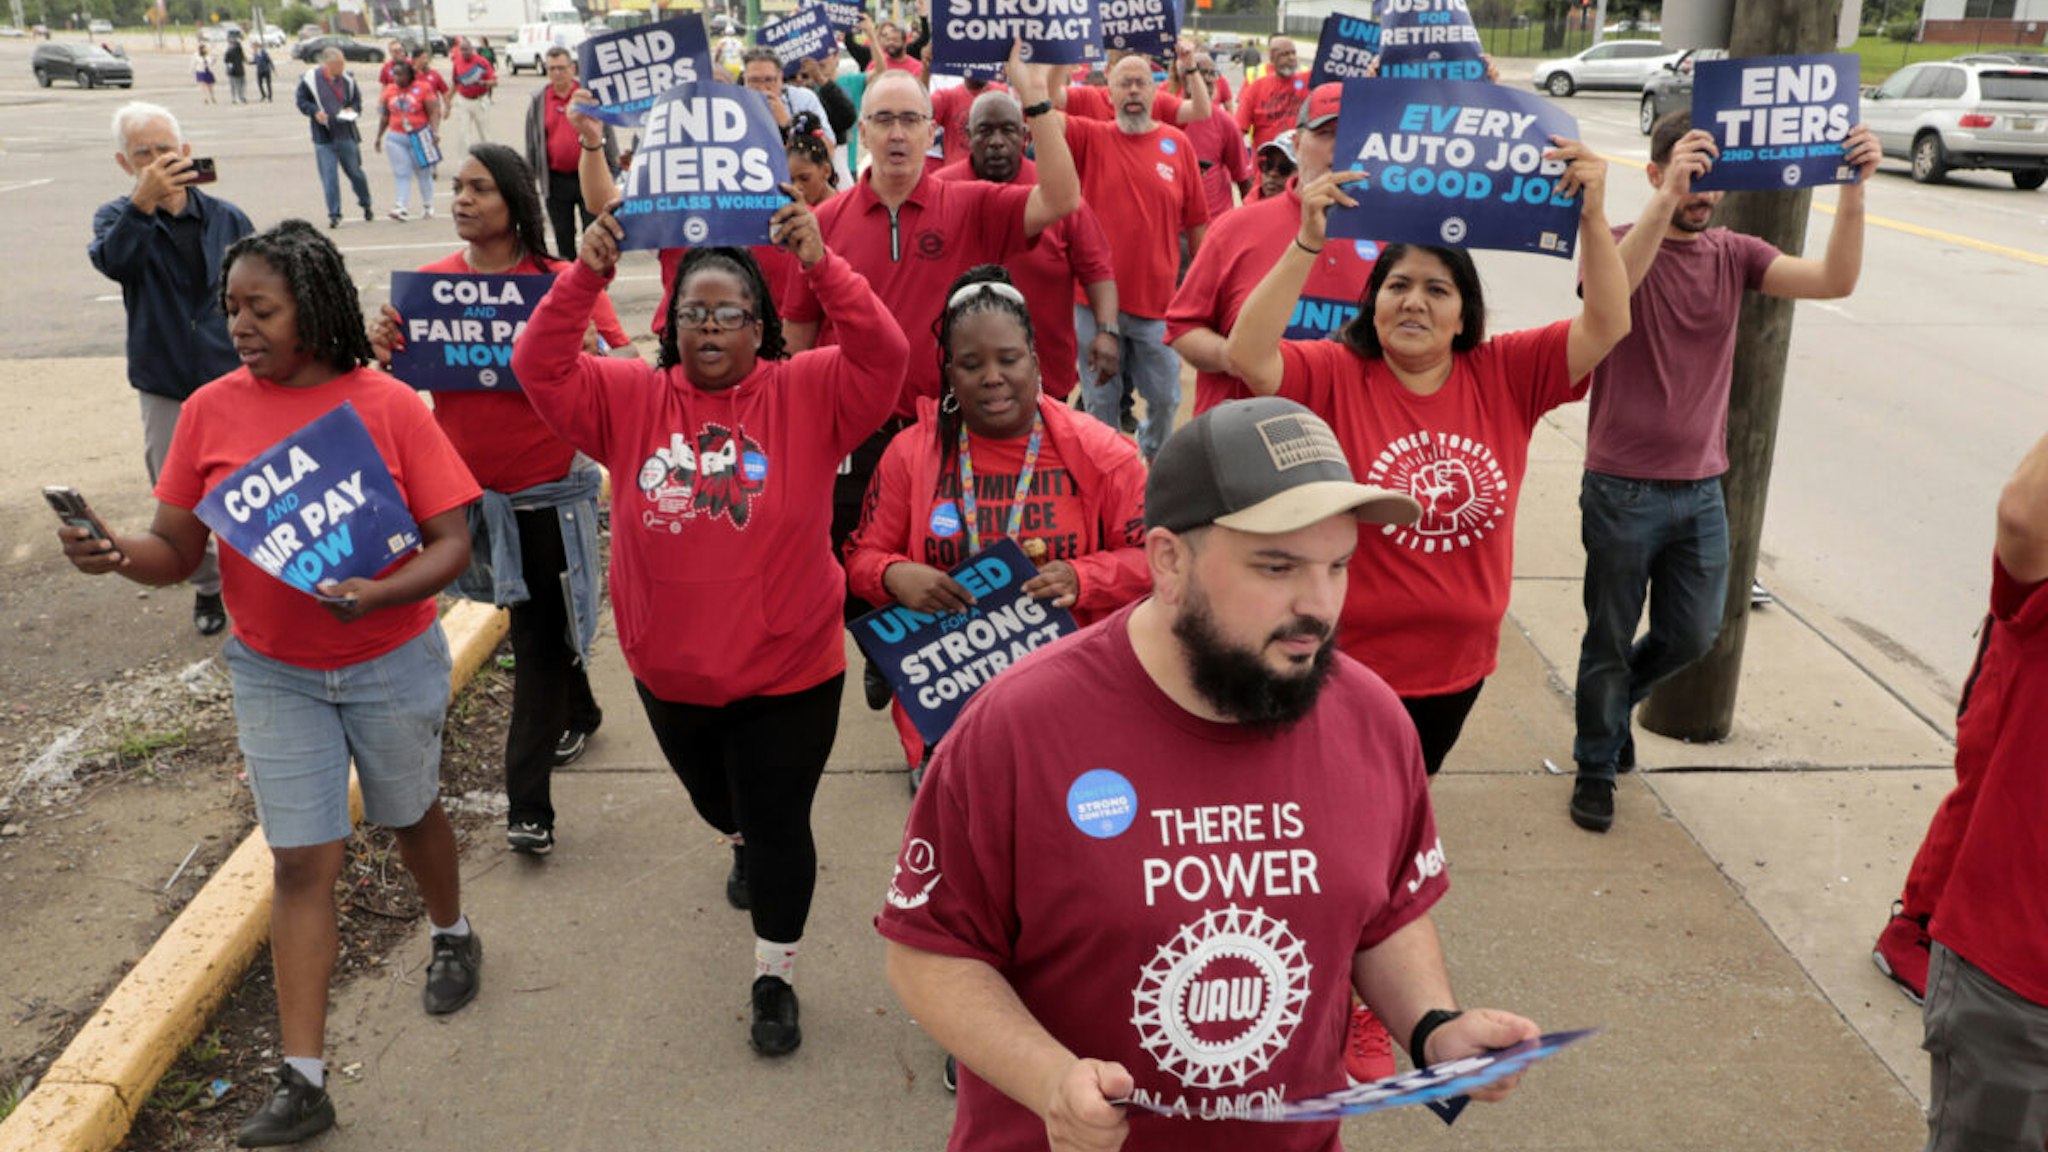 Demonstrators during a United Auto Workers (UAW) practice picket outside the Stellantis Mack Assembly Plant in Detroit, Michigan, US, on Wednesday, Aug. 23, 2023. The union is locked in tough contract talks with Detroit's Big Three automakers, and a work stoppage is possible when their current agreement expires on Sept. 14.